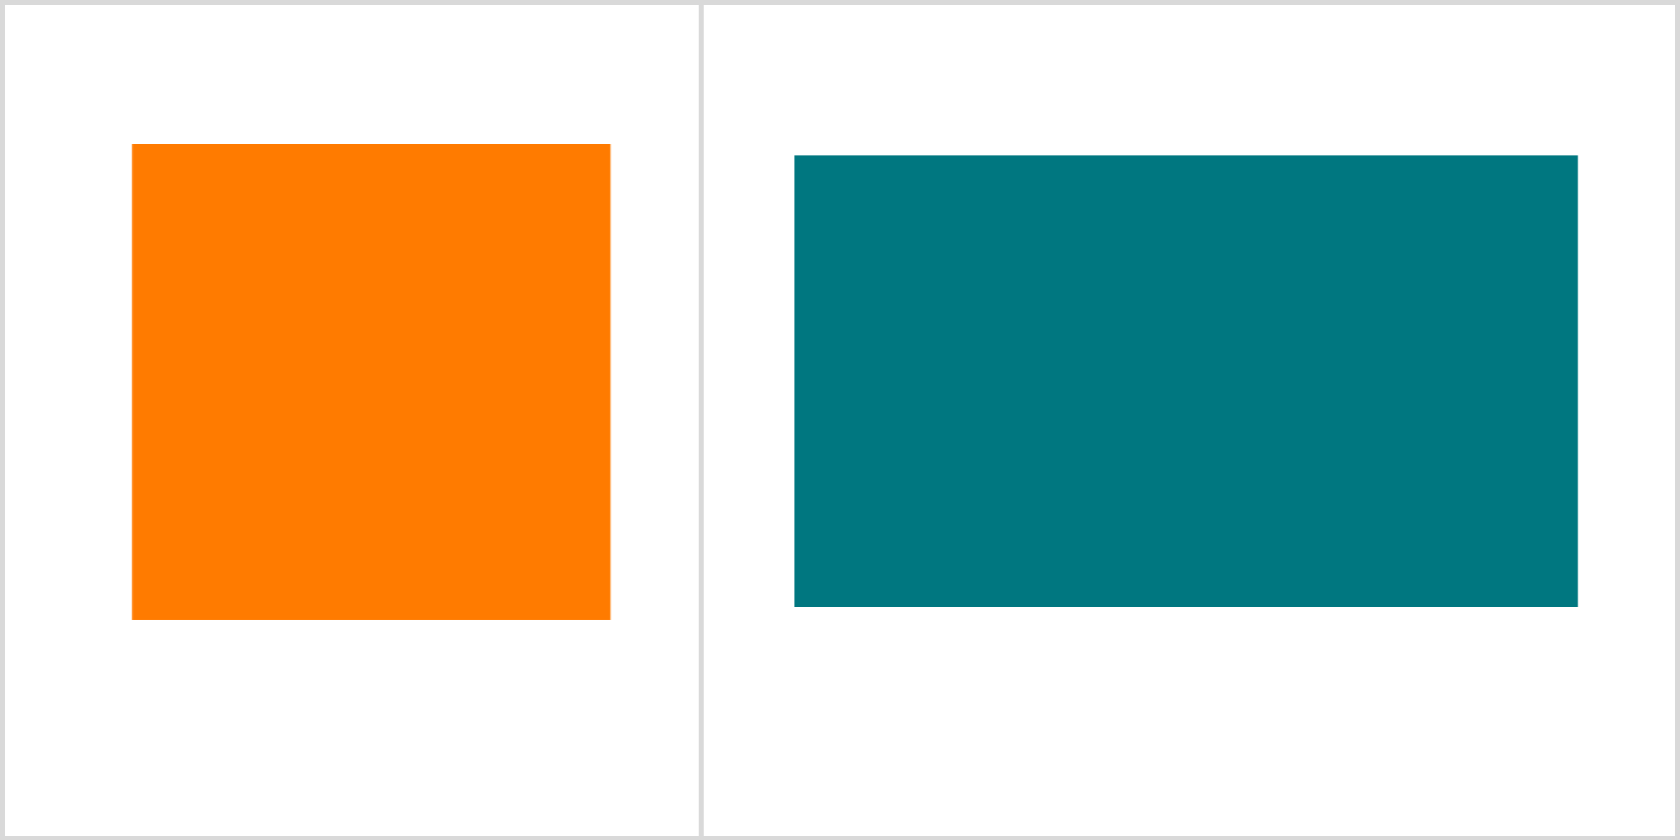 Square and rectangle using CSS